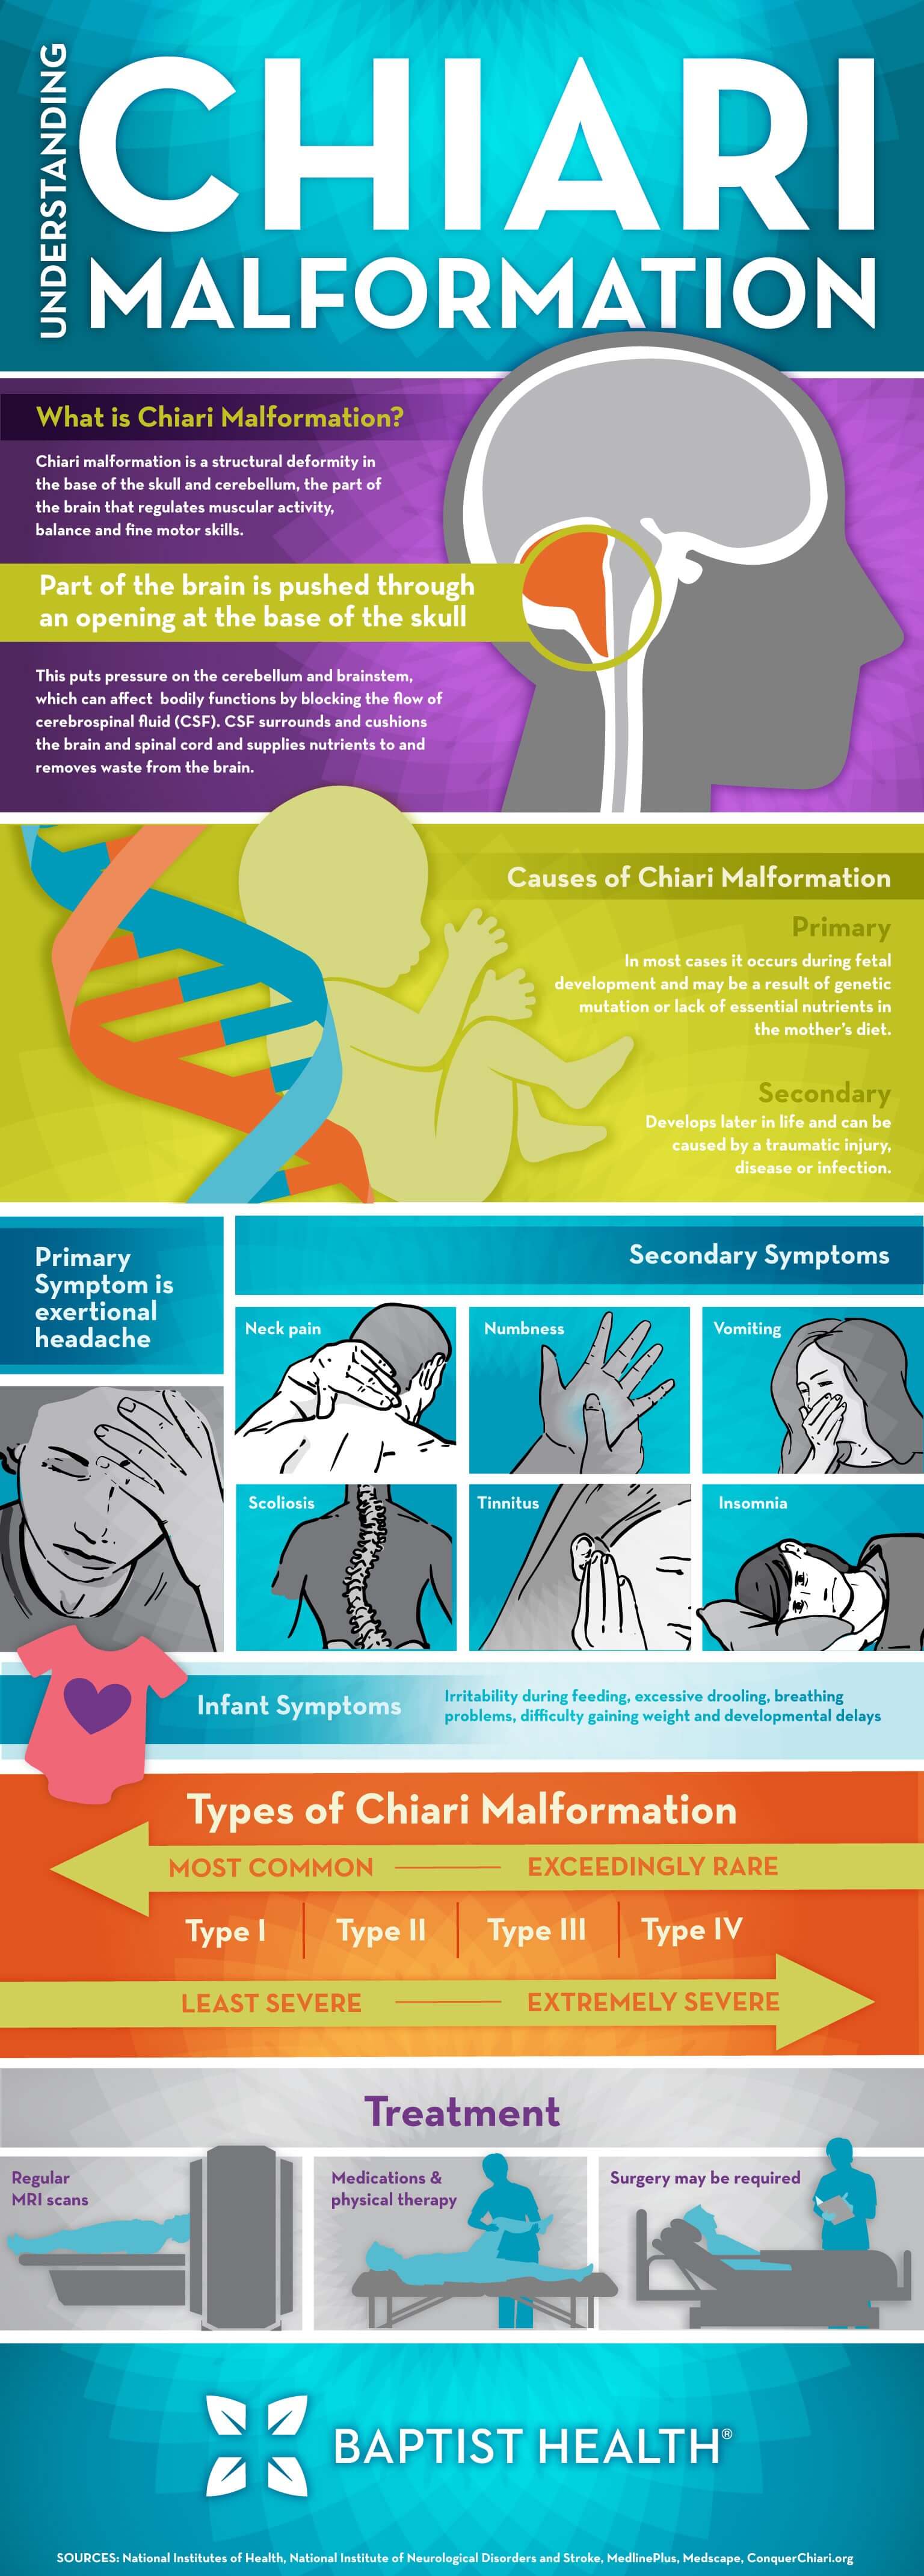 infographic-chiari-malformation-patient-story